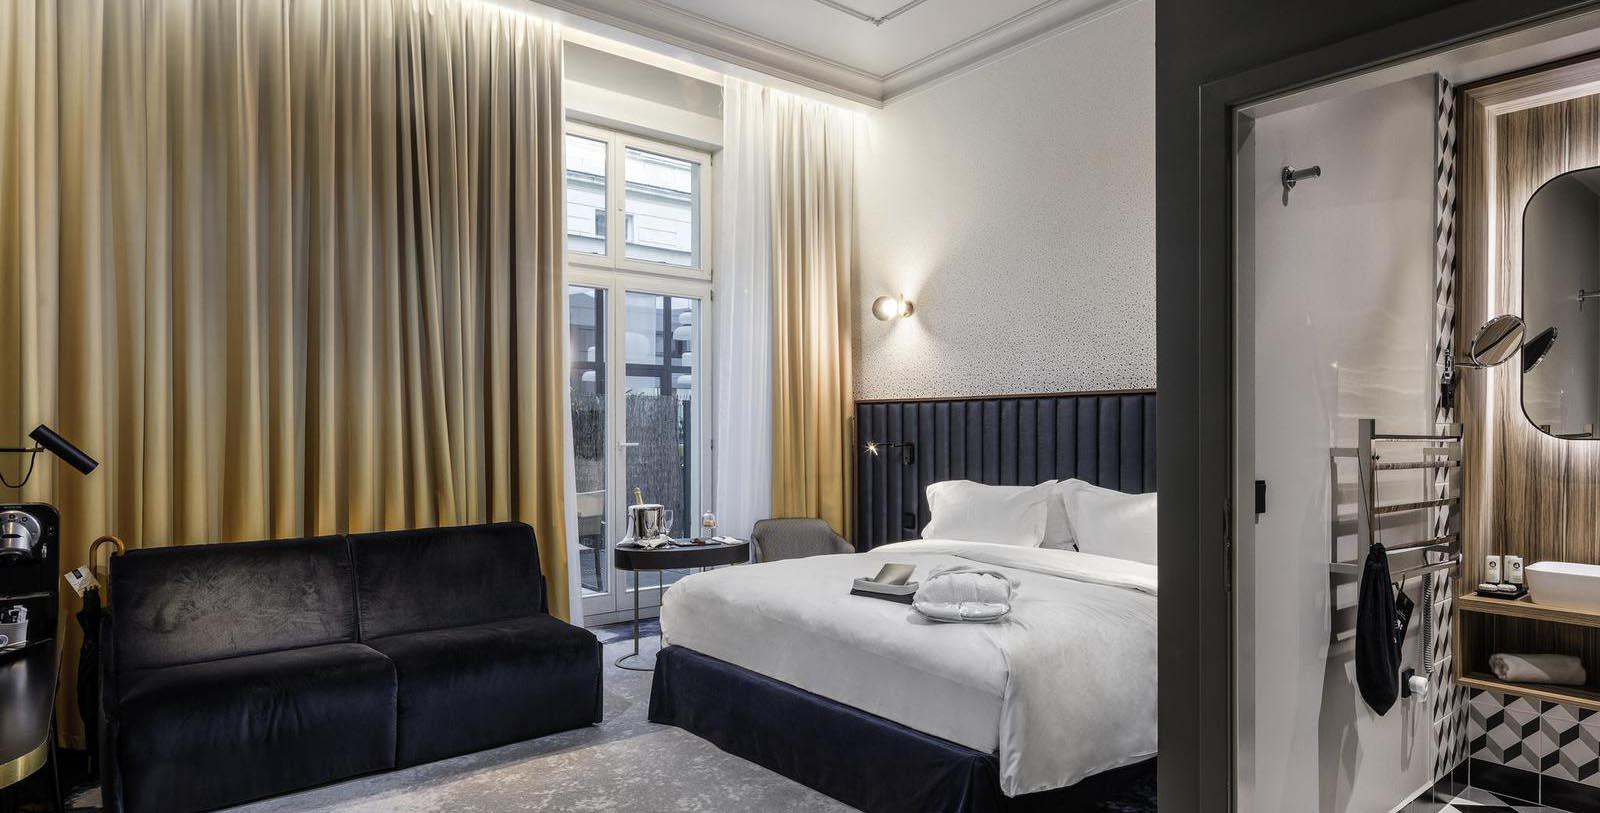 Image of Guestroom, Hotel Century Old Town Prague - MGallery by Sofitel, 1894, Member of Historic Hotels Worldwide, in Prague, Czech Republic, Accommodations